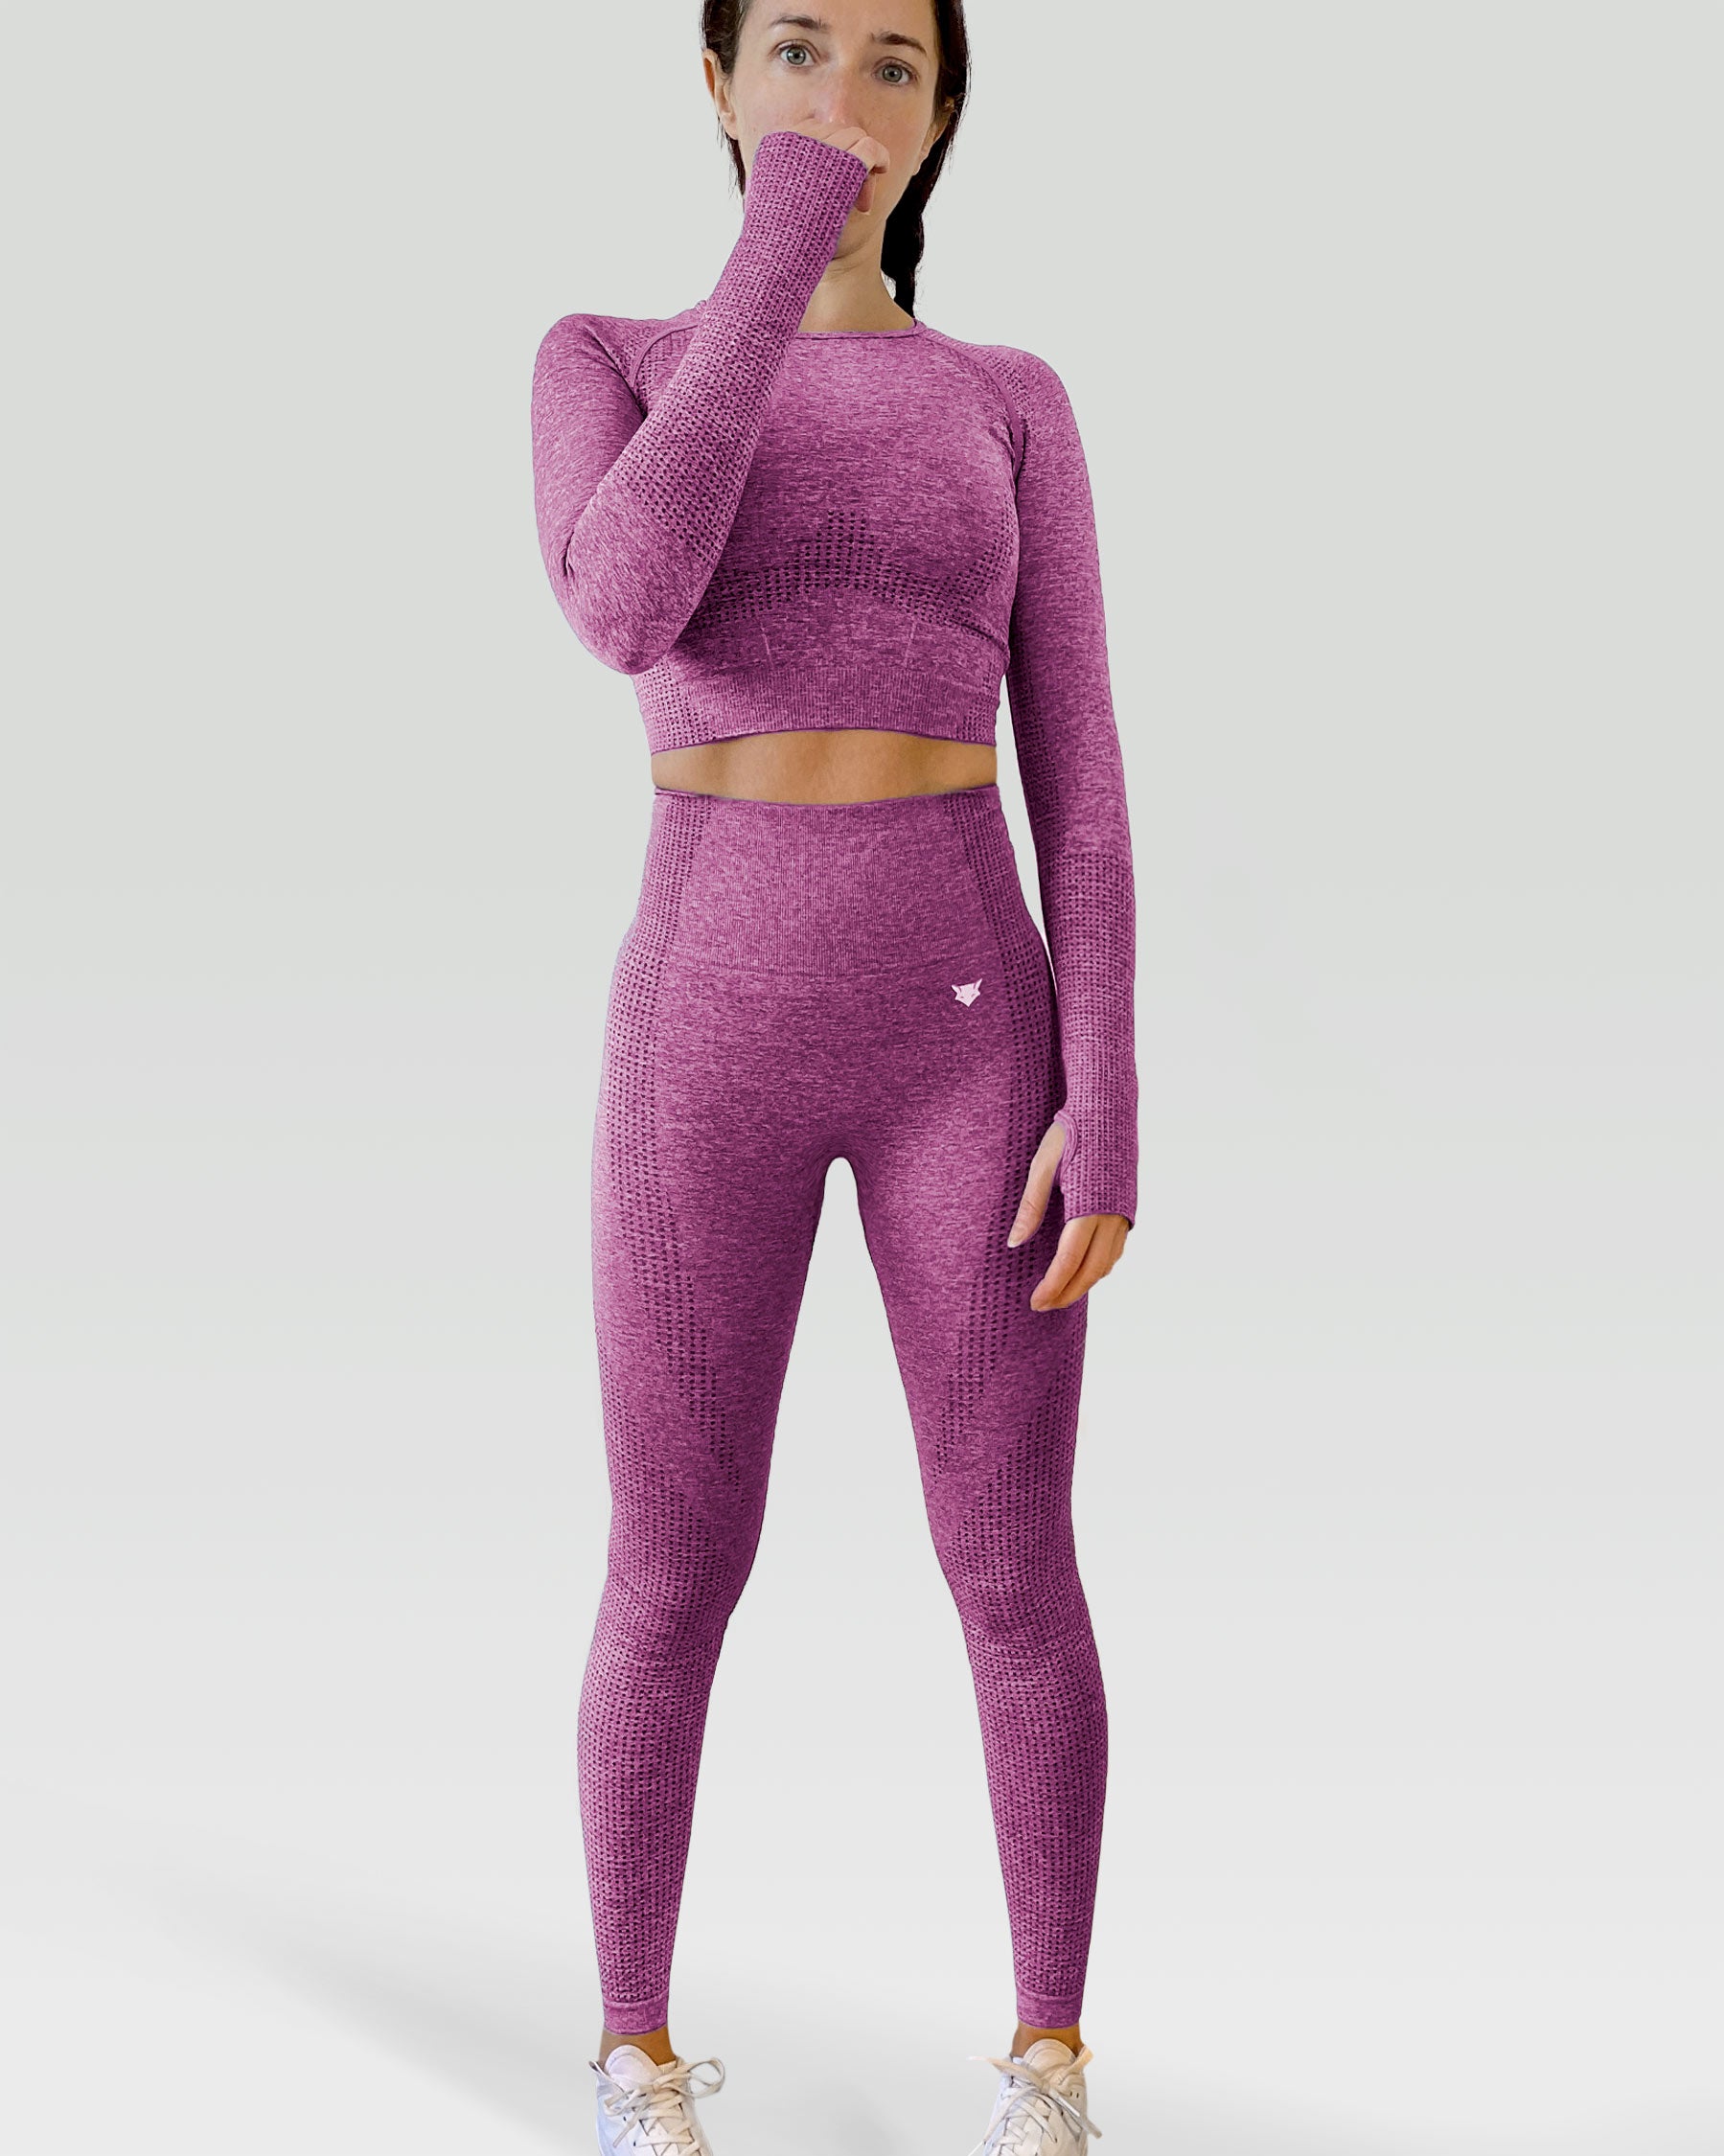 Athletic Seamless Longsleeve Thumbhole Workout Crop Top in Magenta Purple  Size S